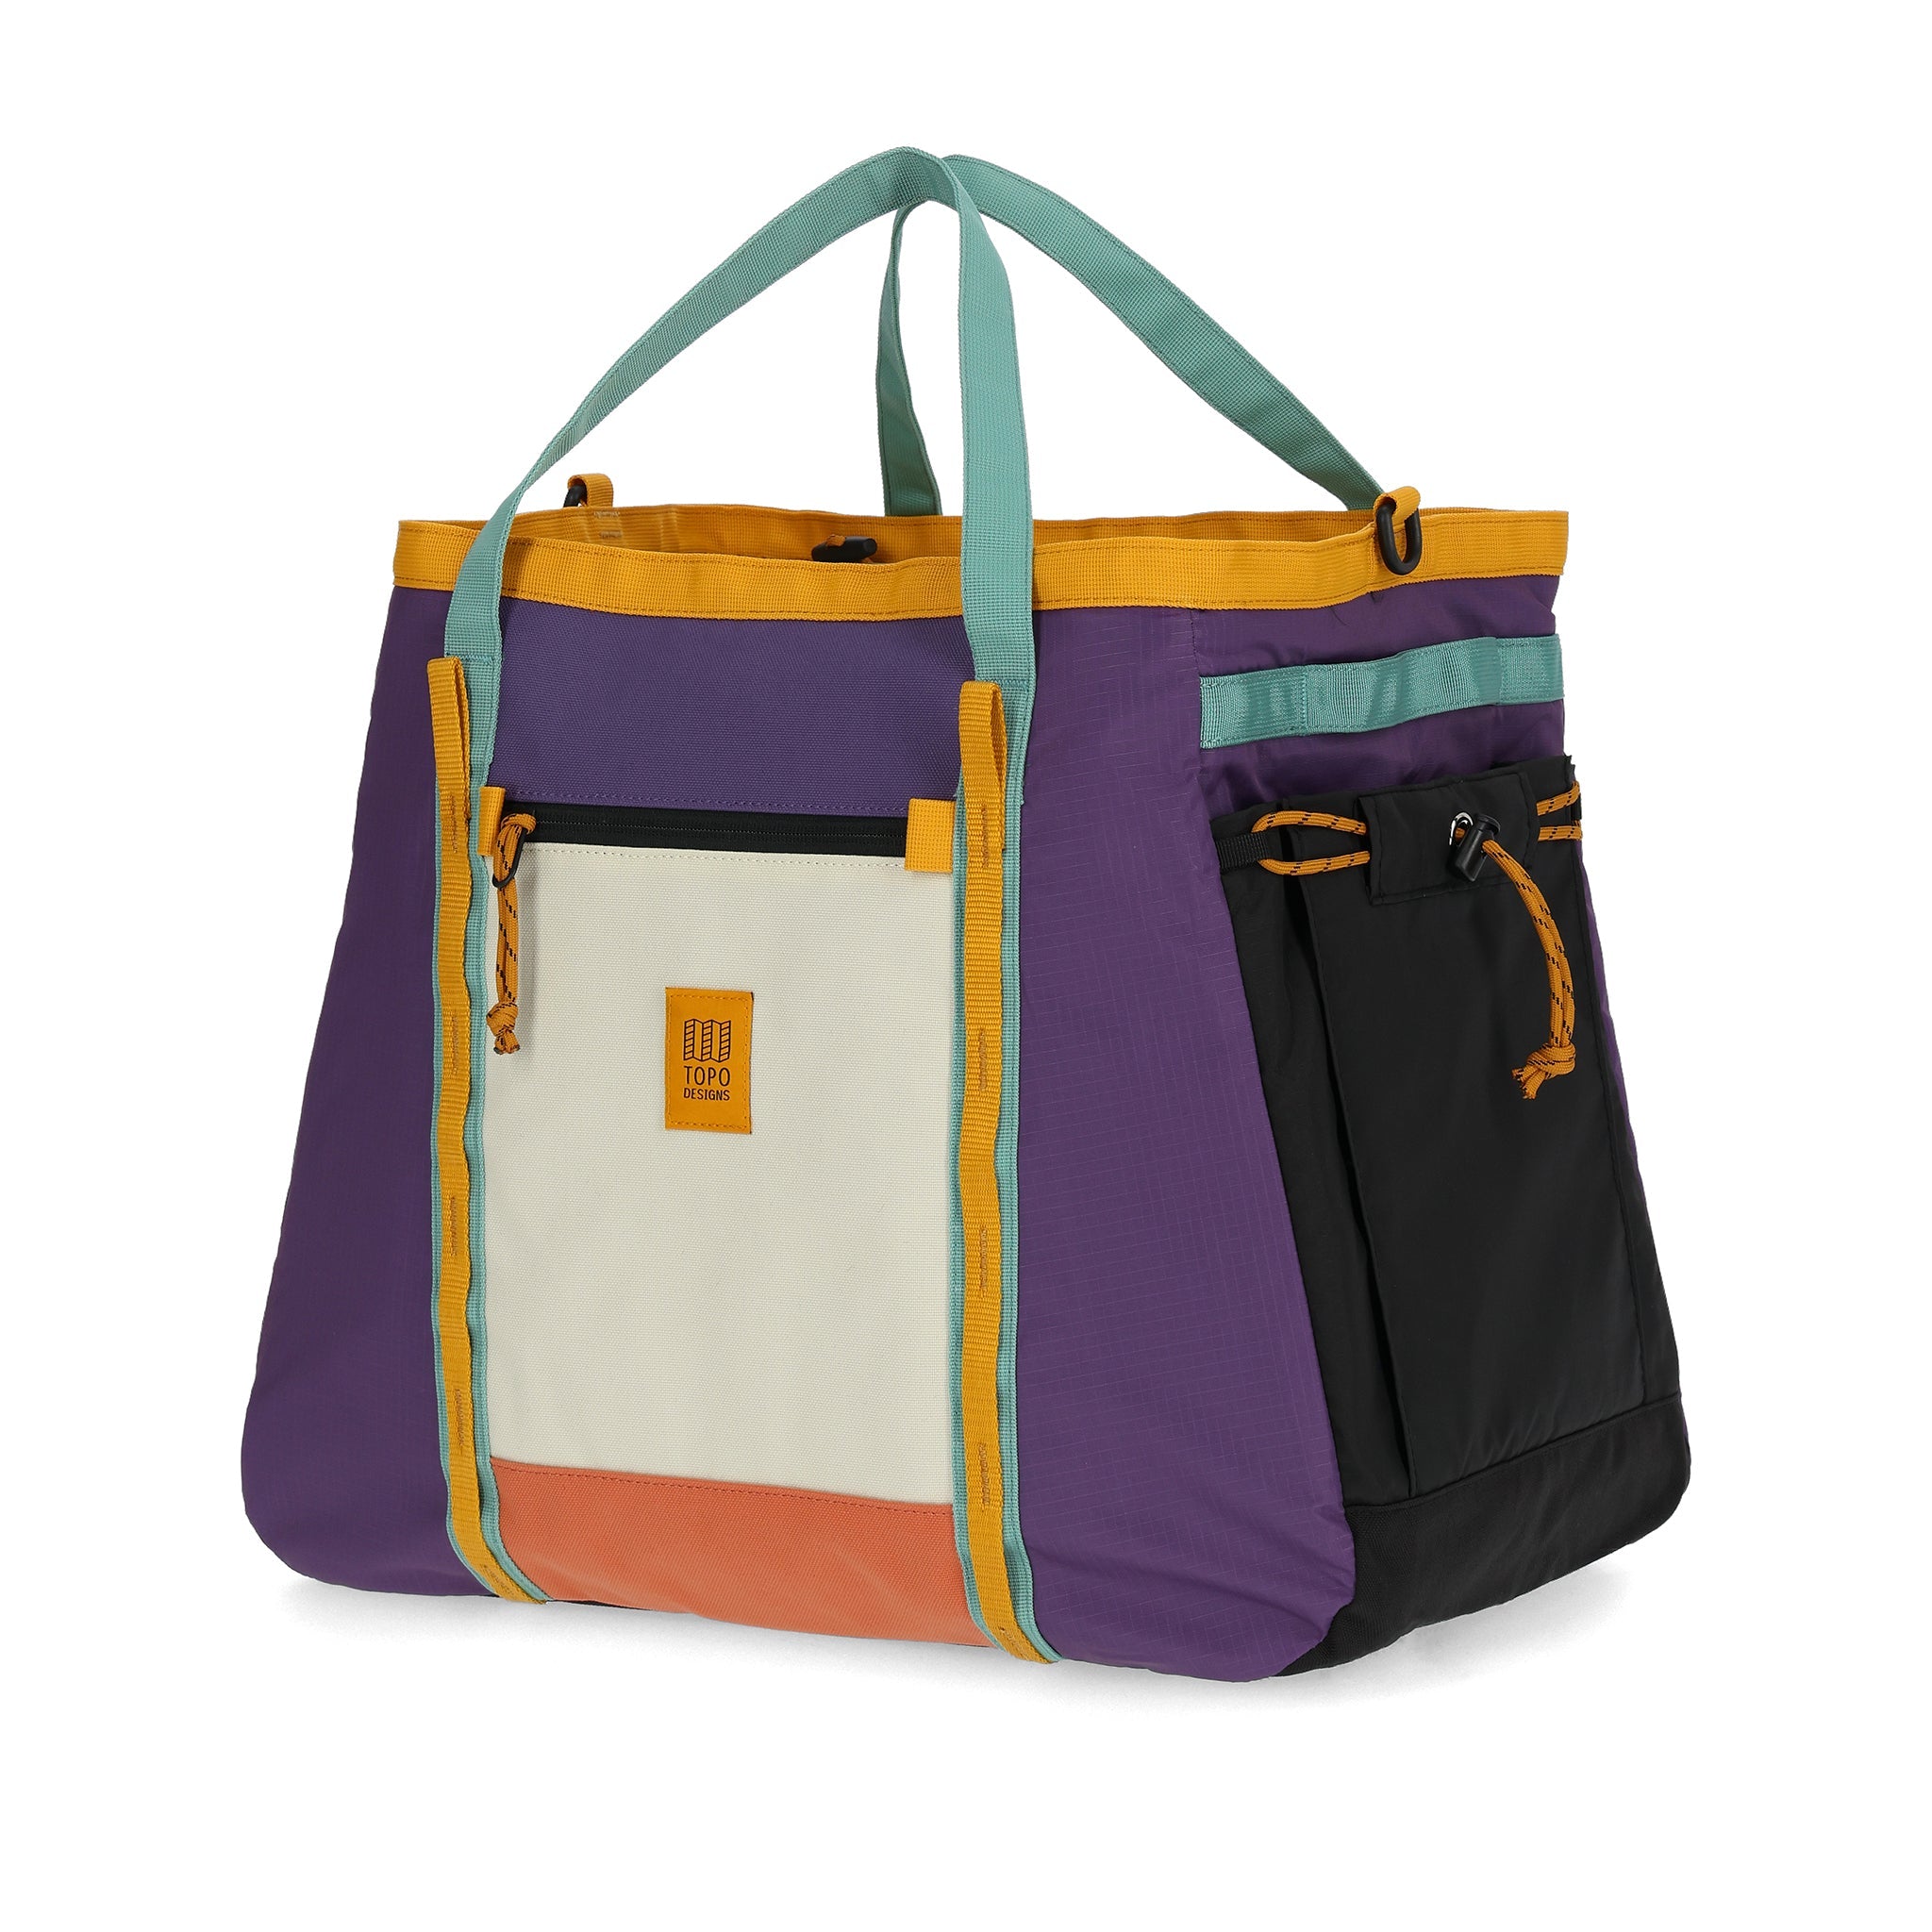 Front View of Topo Designs Mountain Gear Bag in "Loganberry / Bone White"